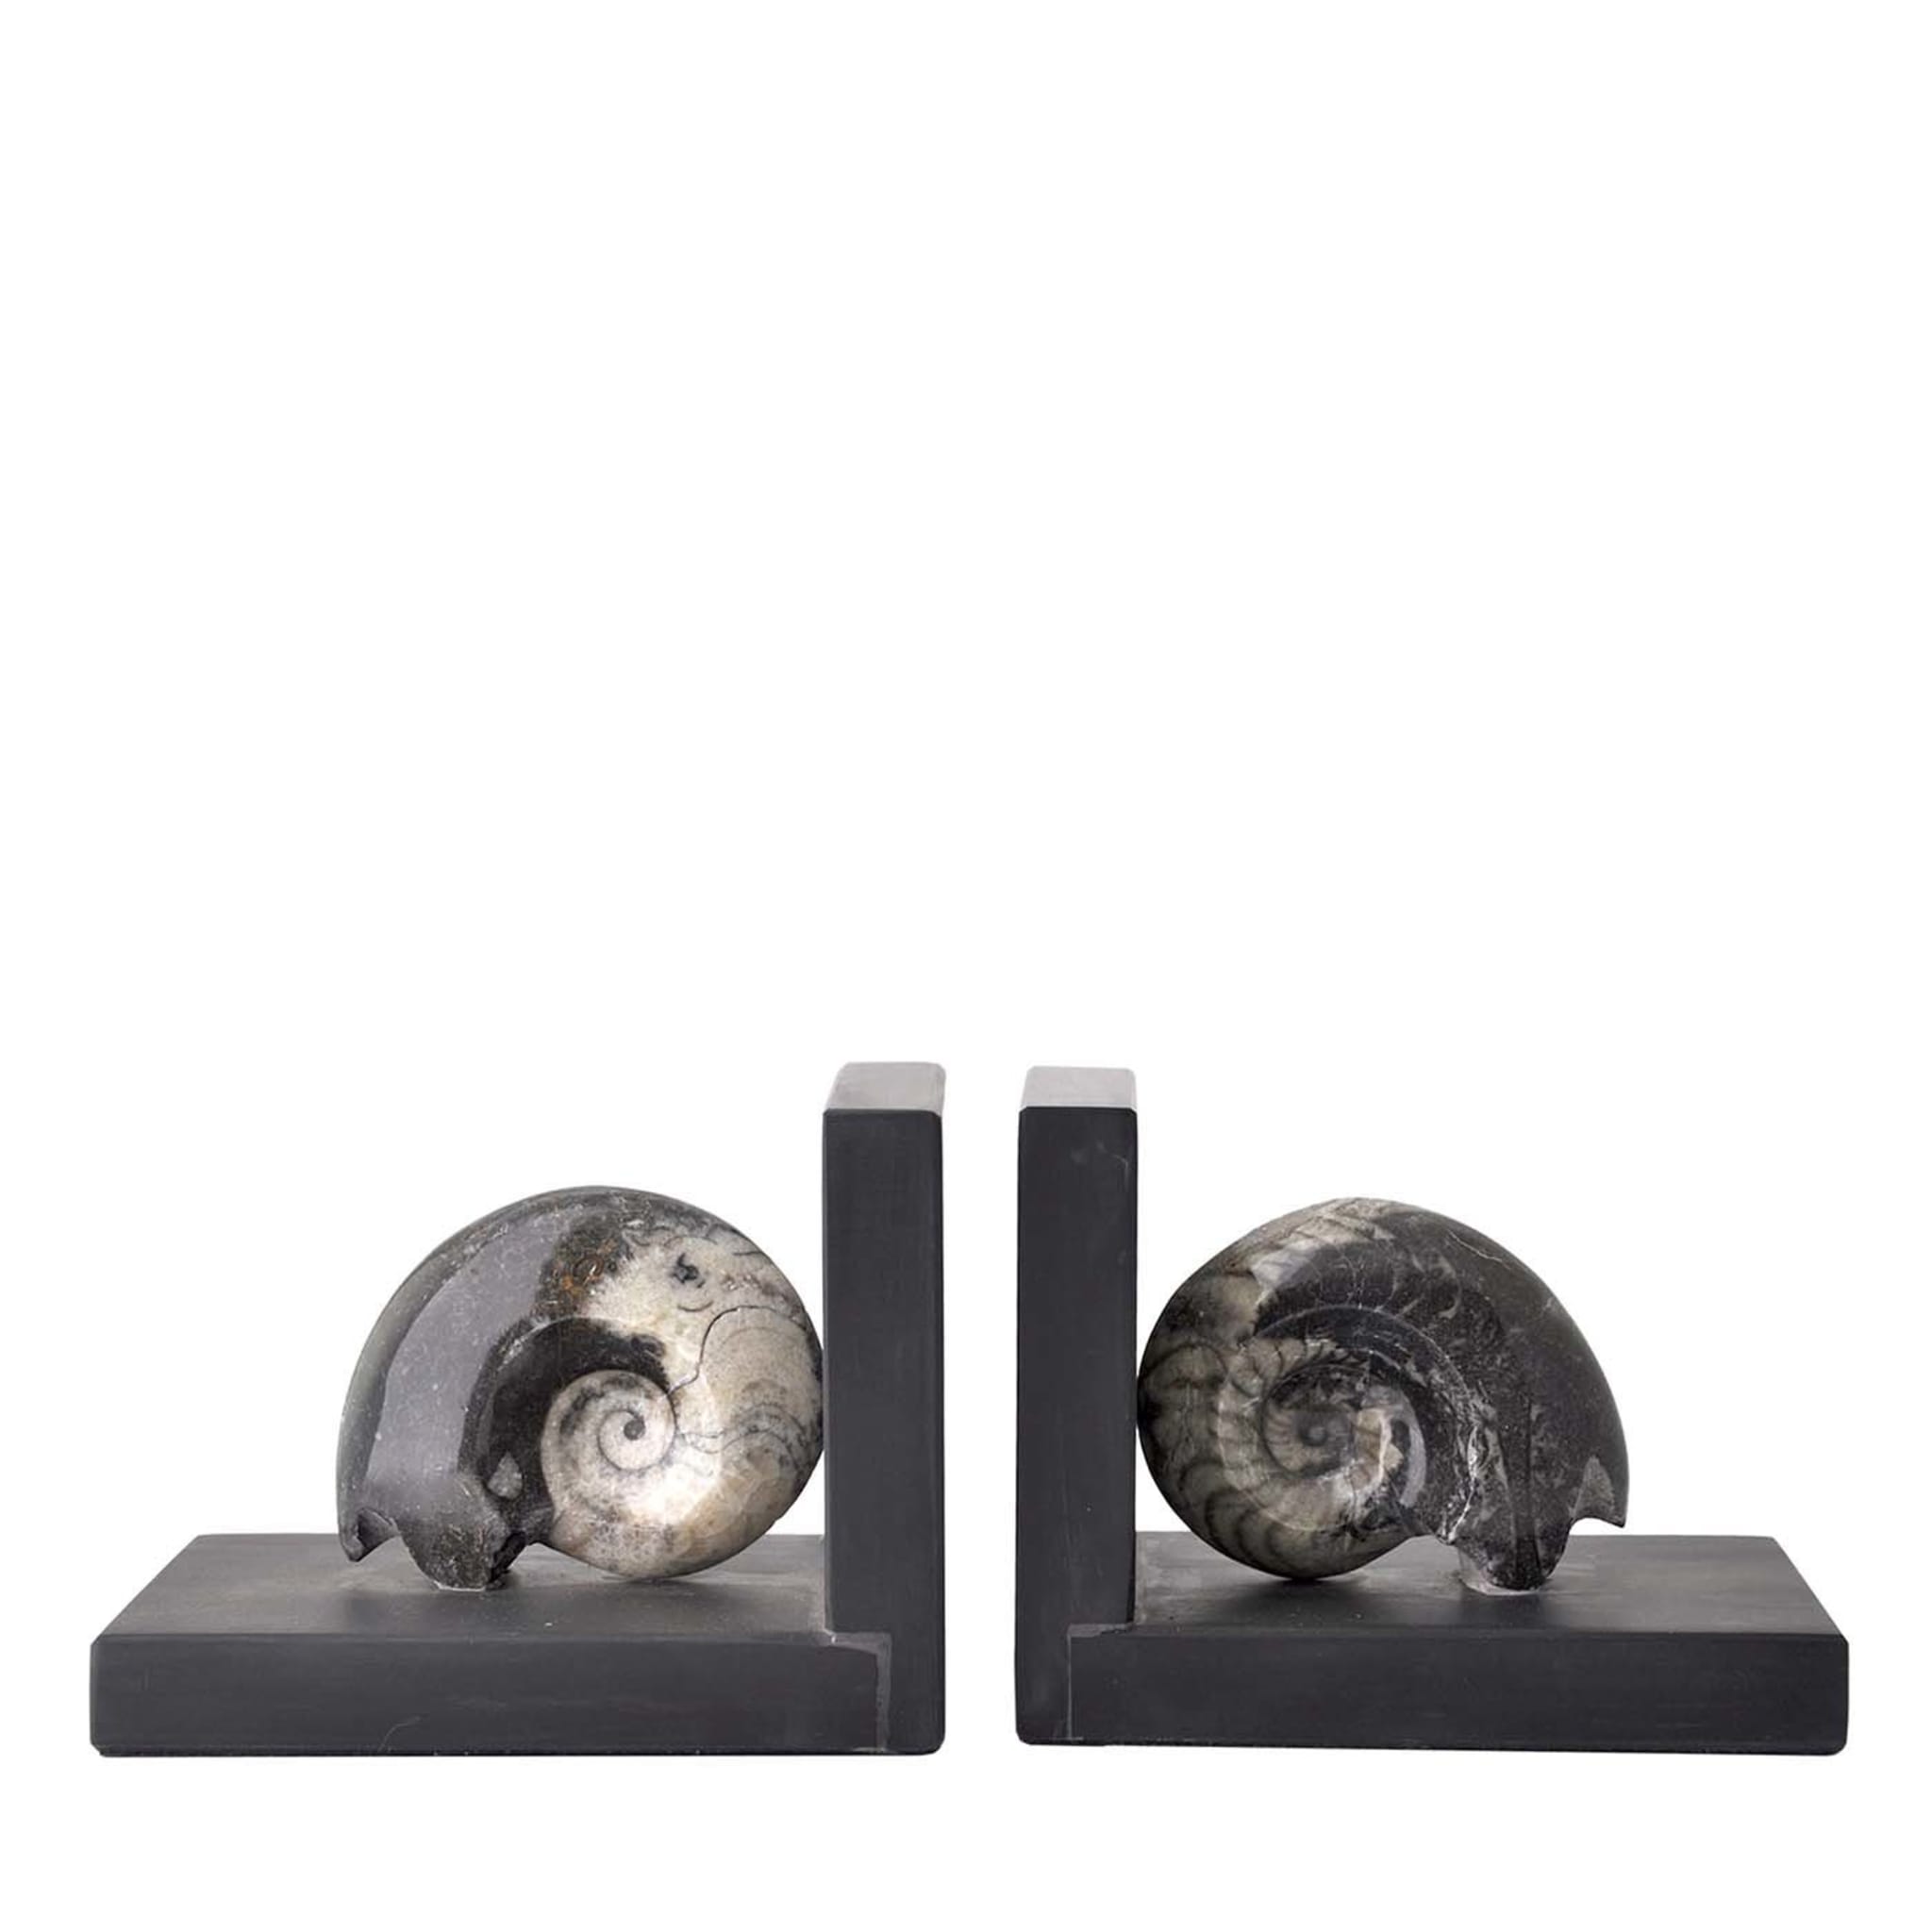 Fossiline Set of Black Bookends by Nino Basso - Main view